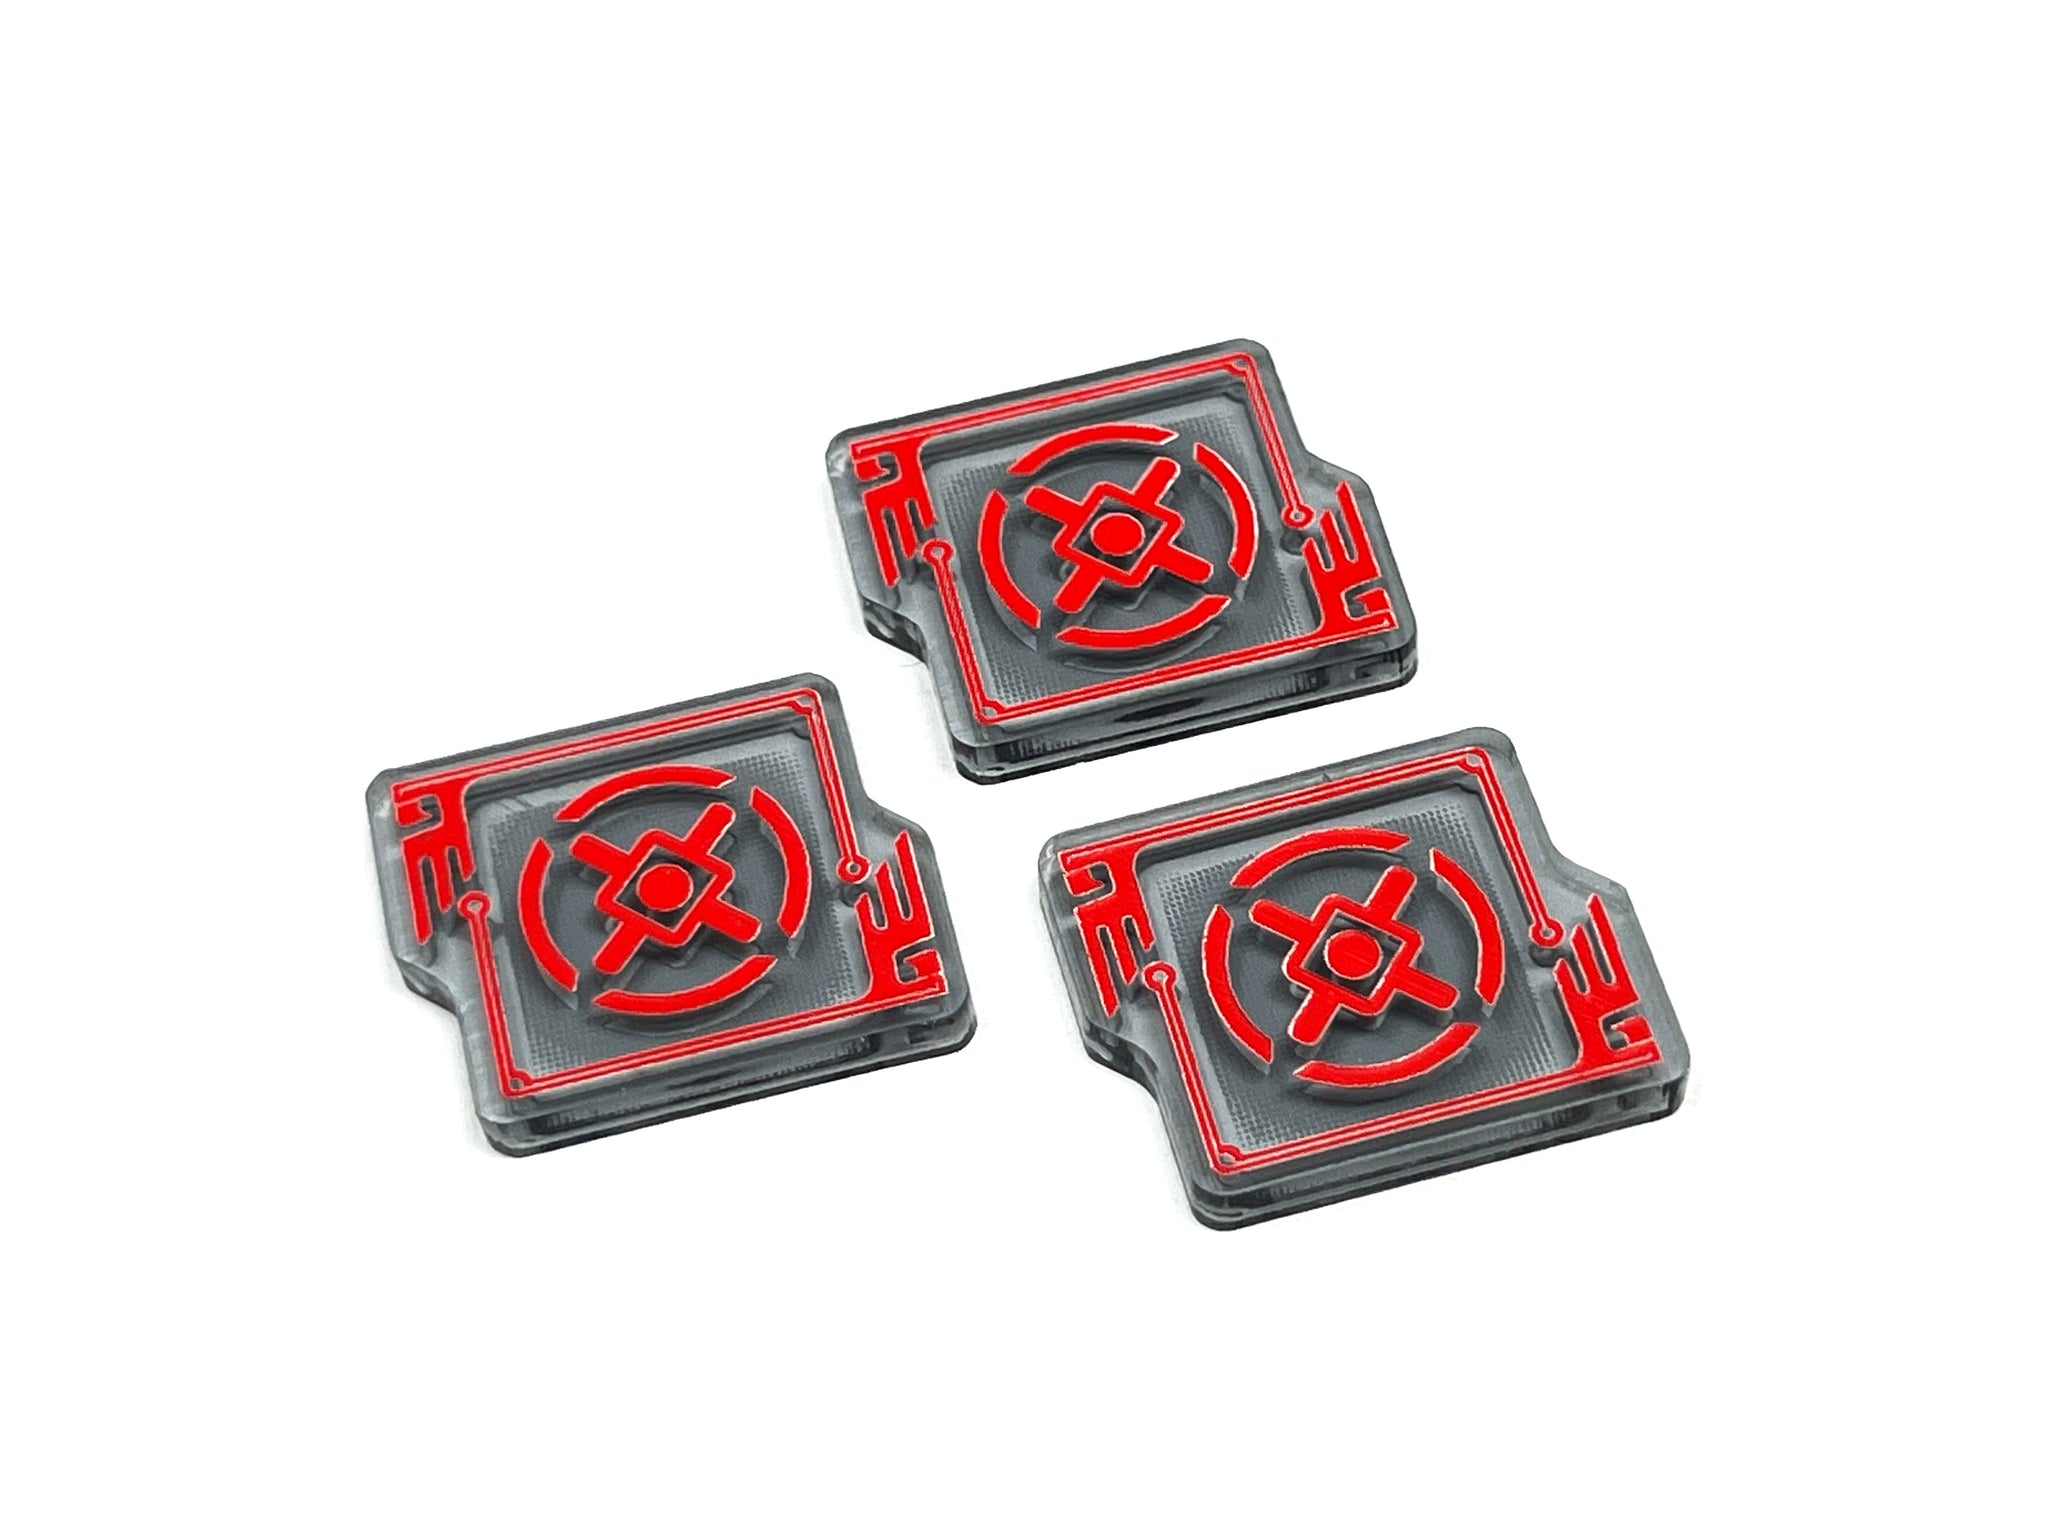 Shooting - Phase ability Token Set for Warhammer 40k 10th Edition